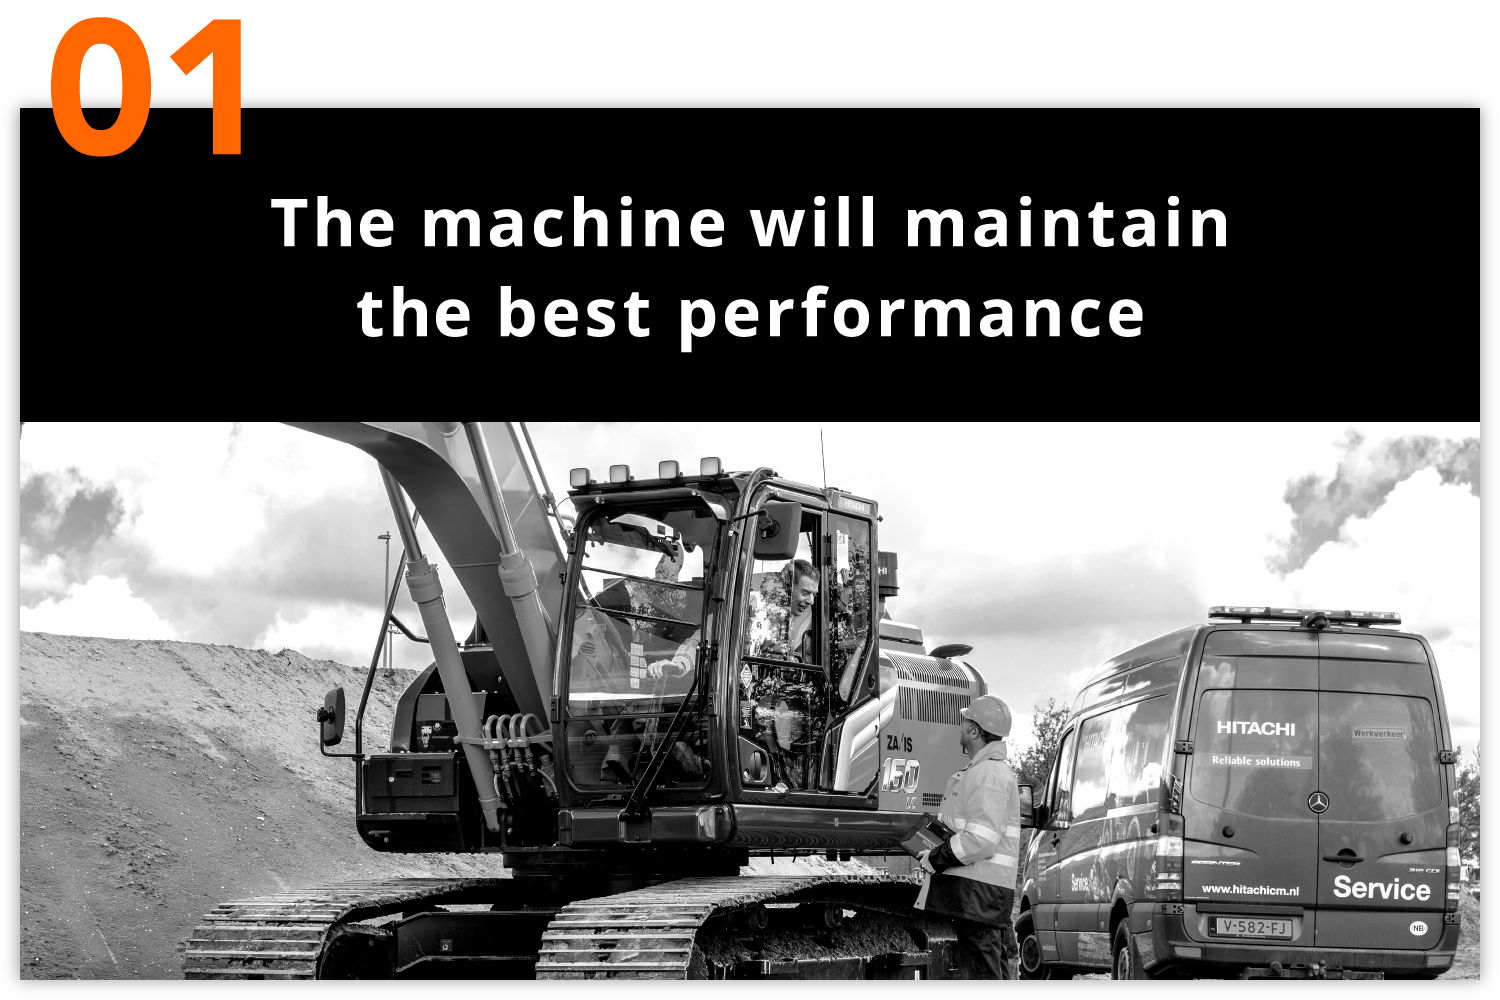 The machine will maintain the best performance